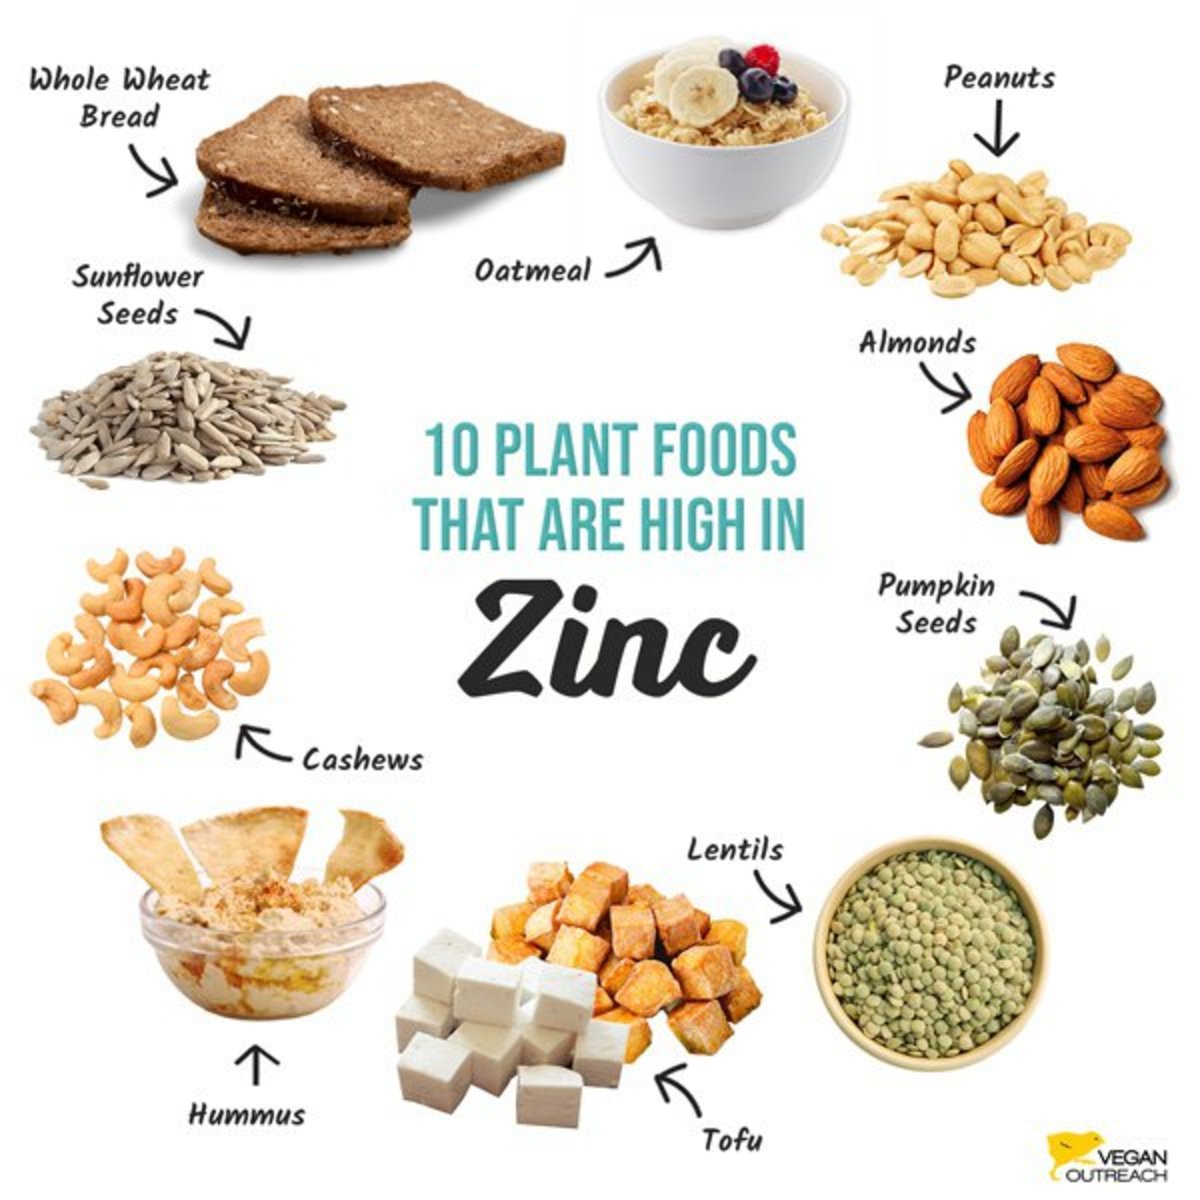 Foods that are high in zinc